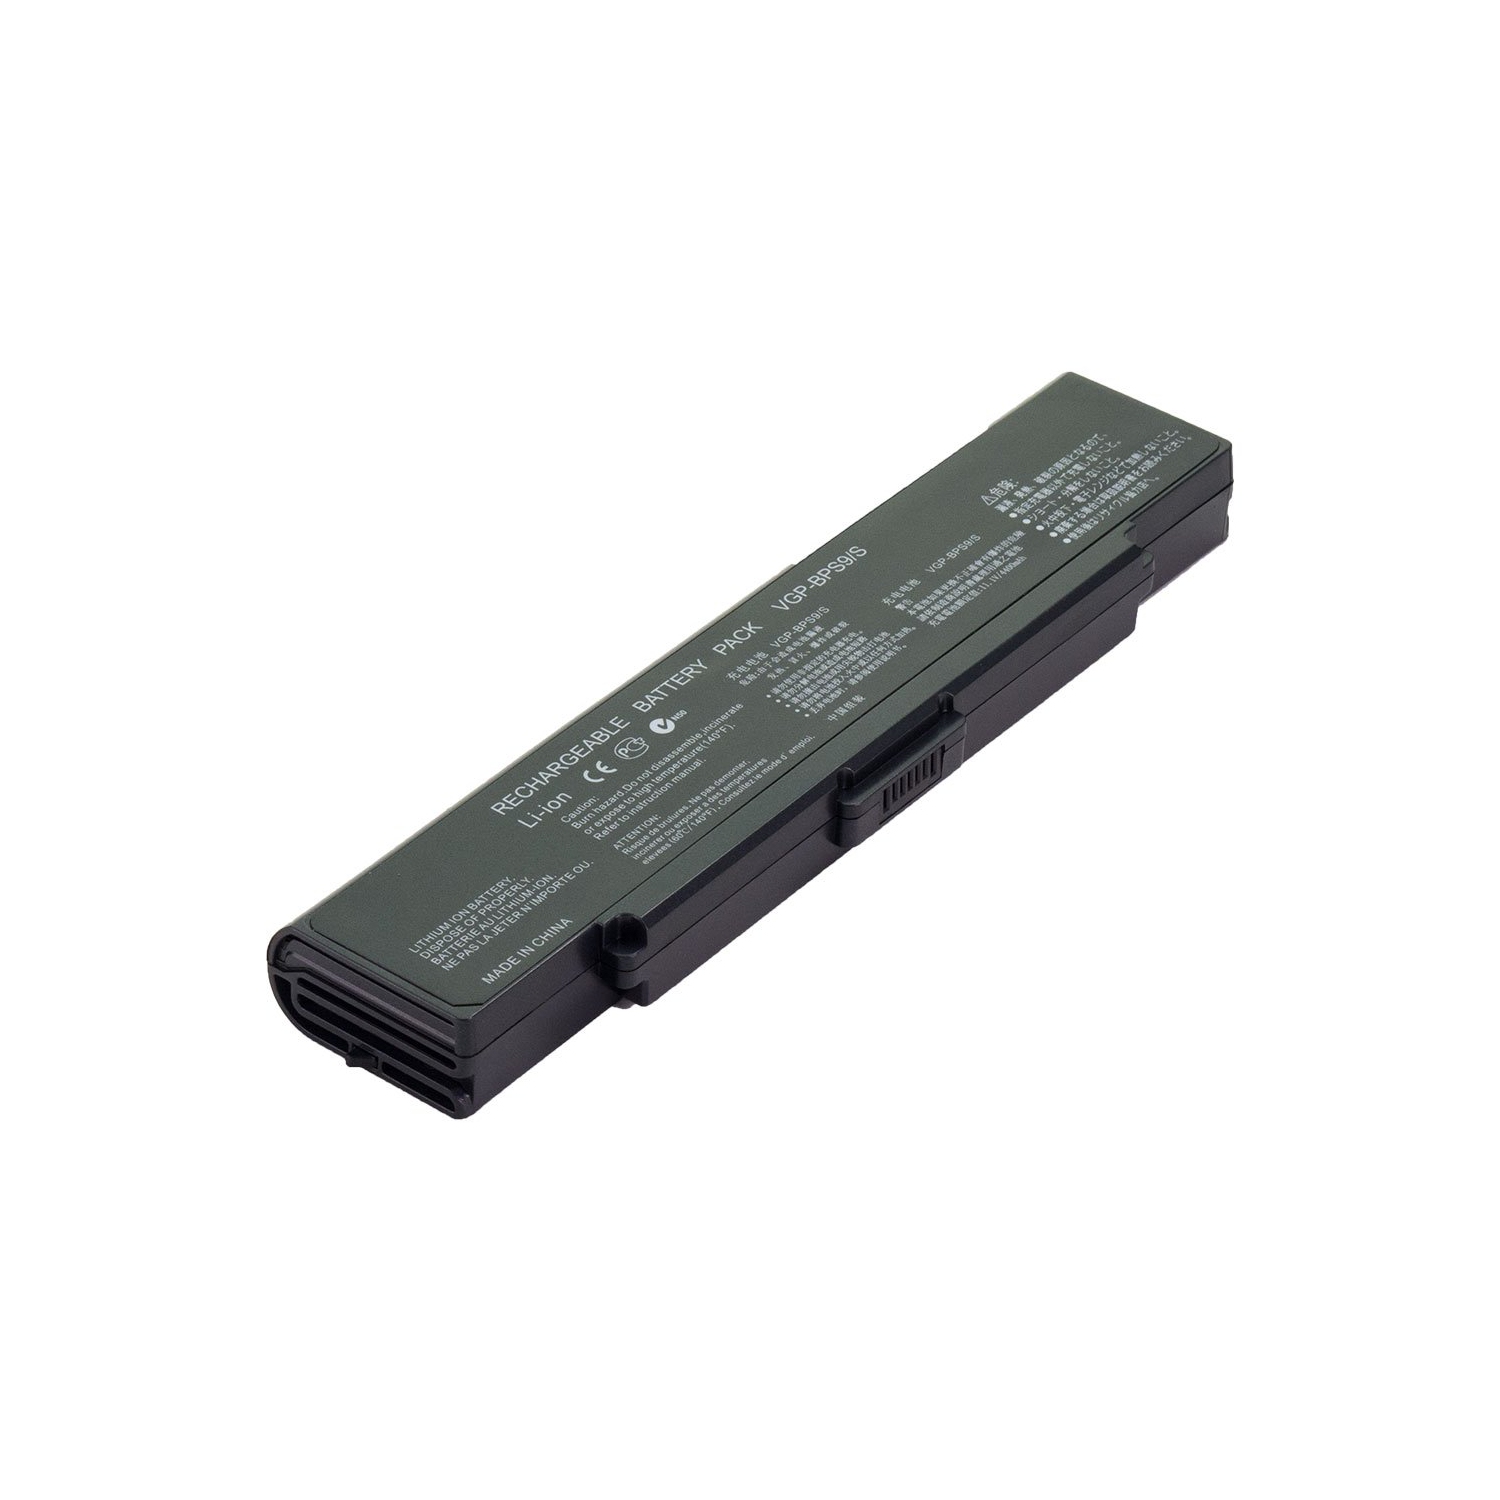 Laptop Battery Replacement for Sony VAIO VGN-CR320E/P, VGP-BPS10, VGP-BPS10A, VGP-BPS9, VGP-BPS9/S, VGP-BPS9A/B